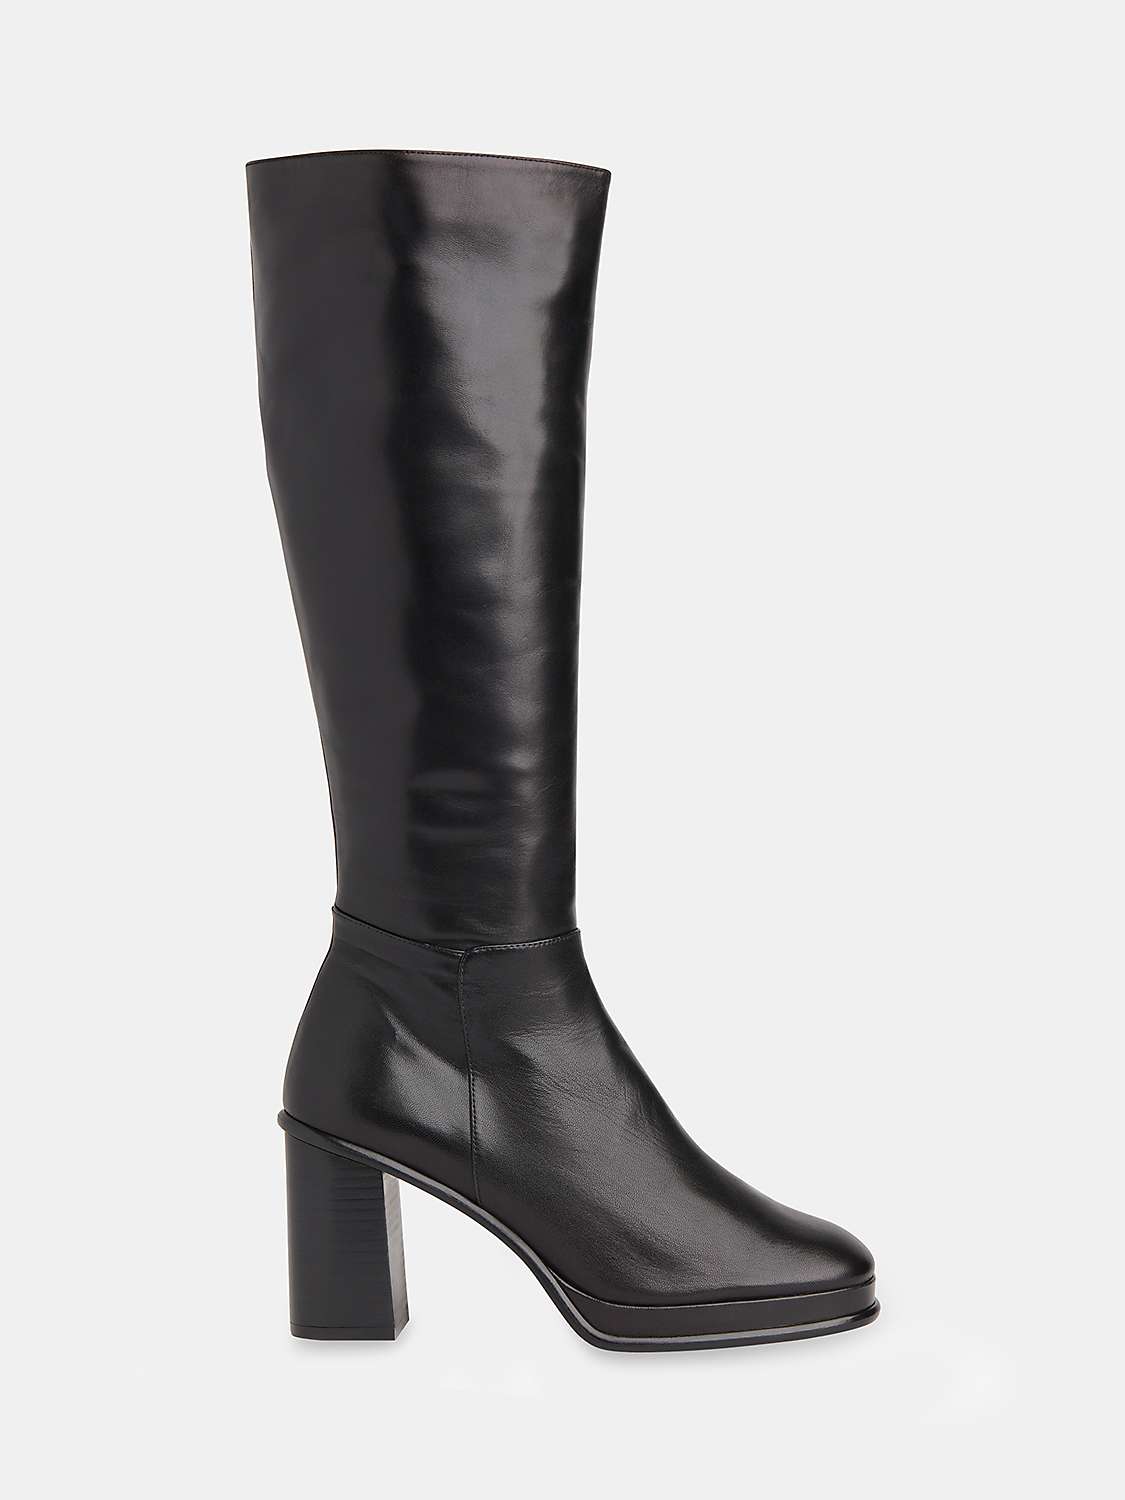 Buy Whistles Clara Leather Knee High Boots, Black Online at johnlewis.com